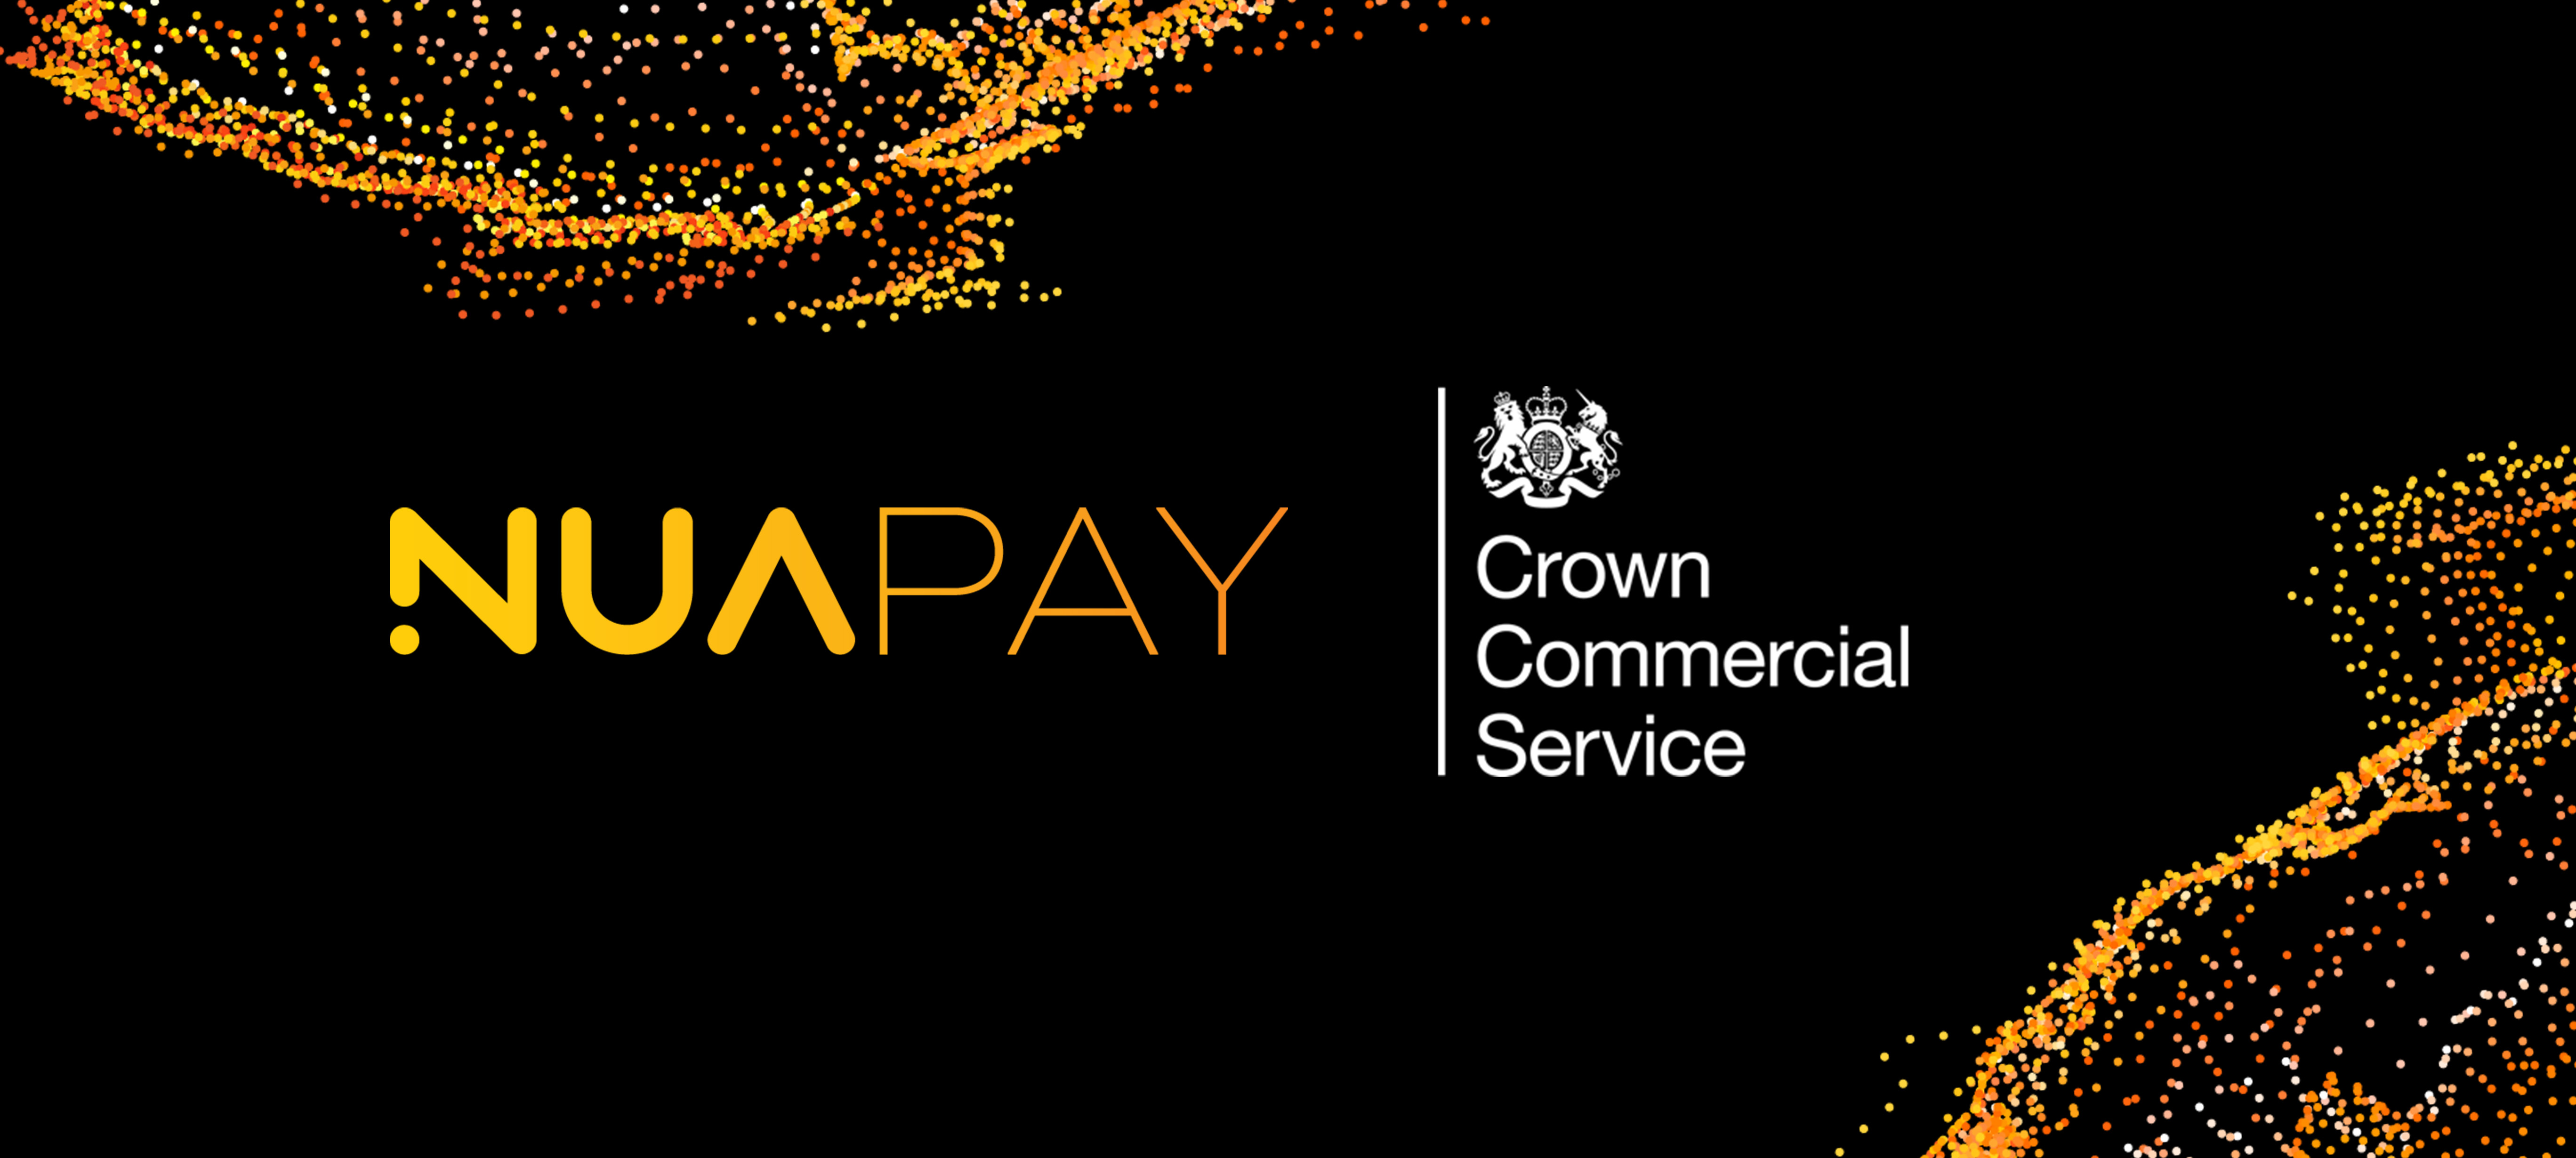 Nuapay joins the Crown Commercial Service's DPS framework